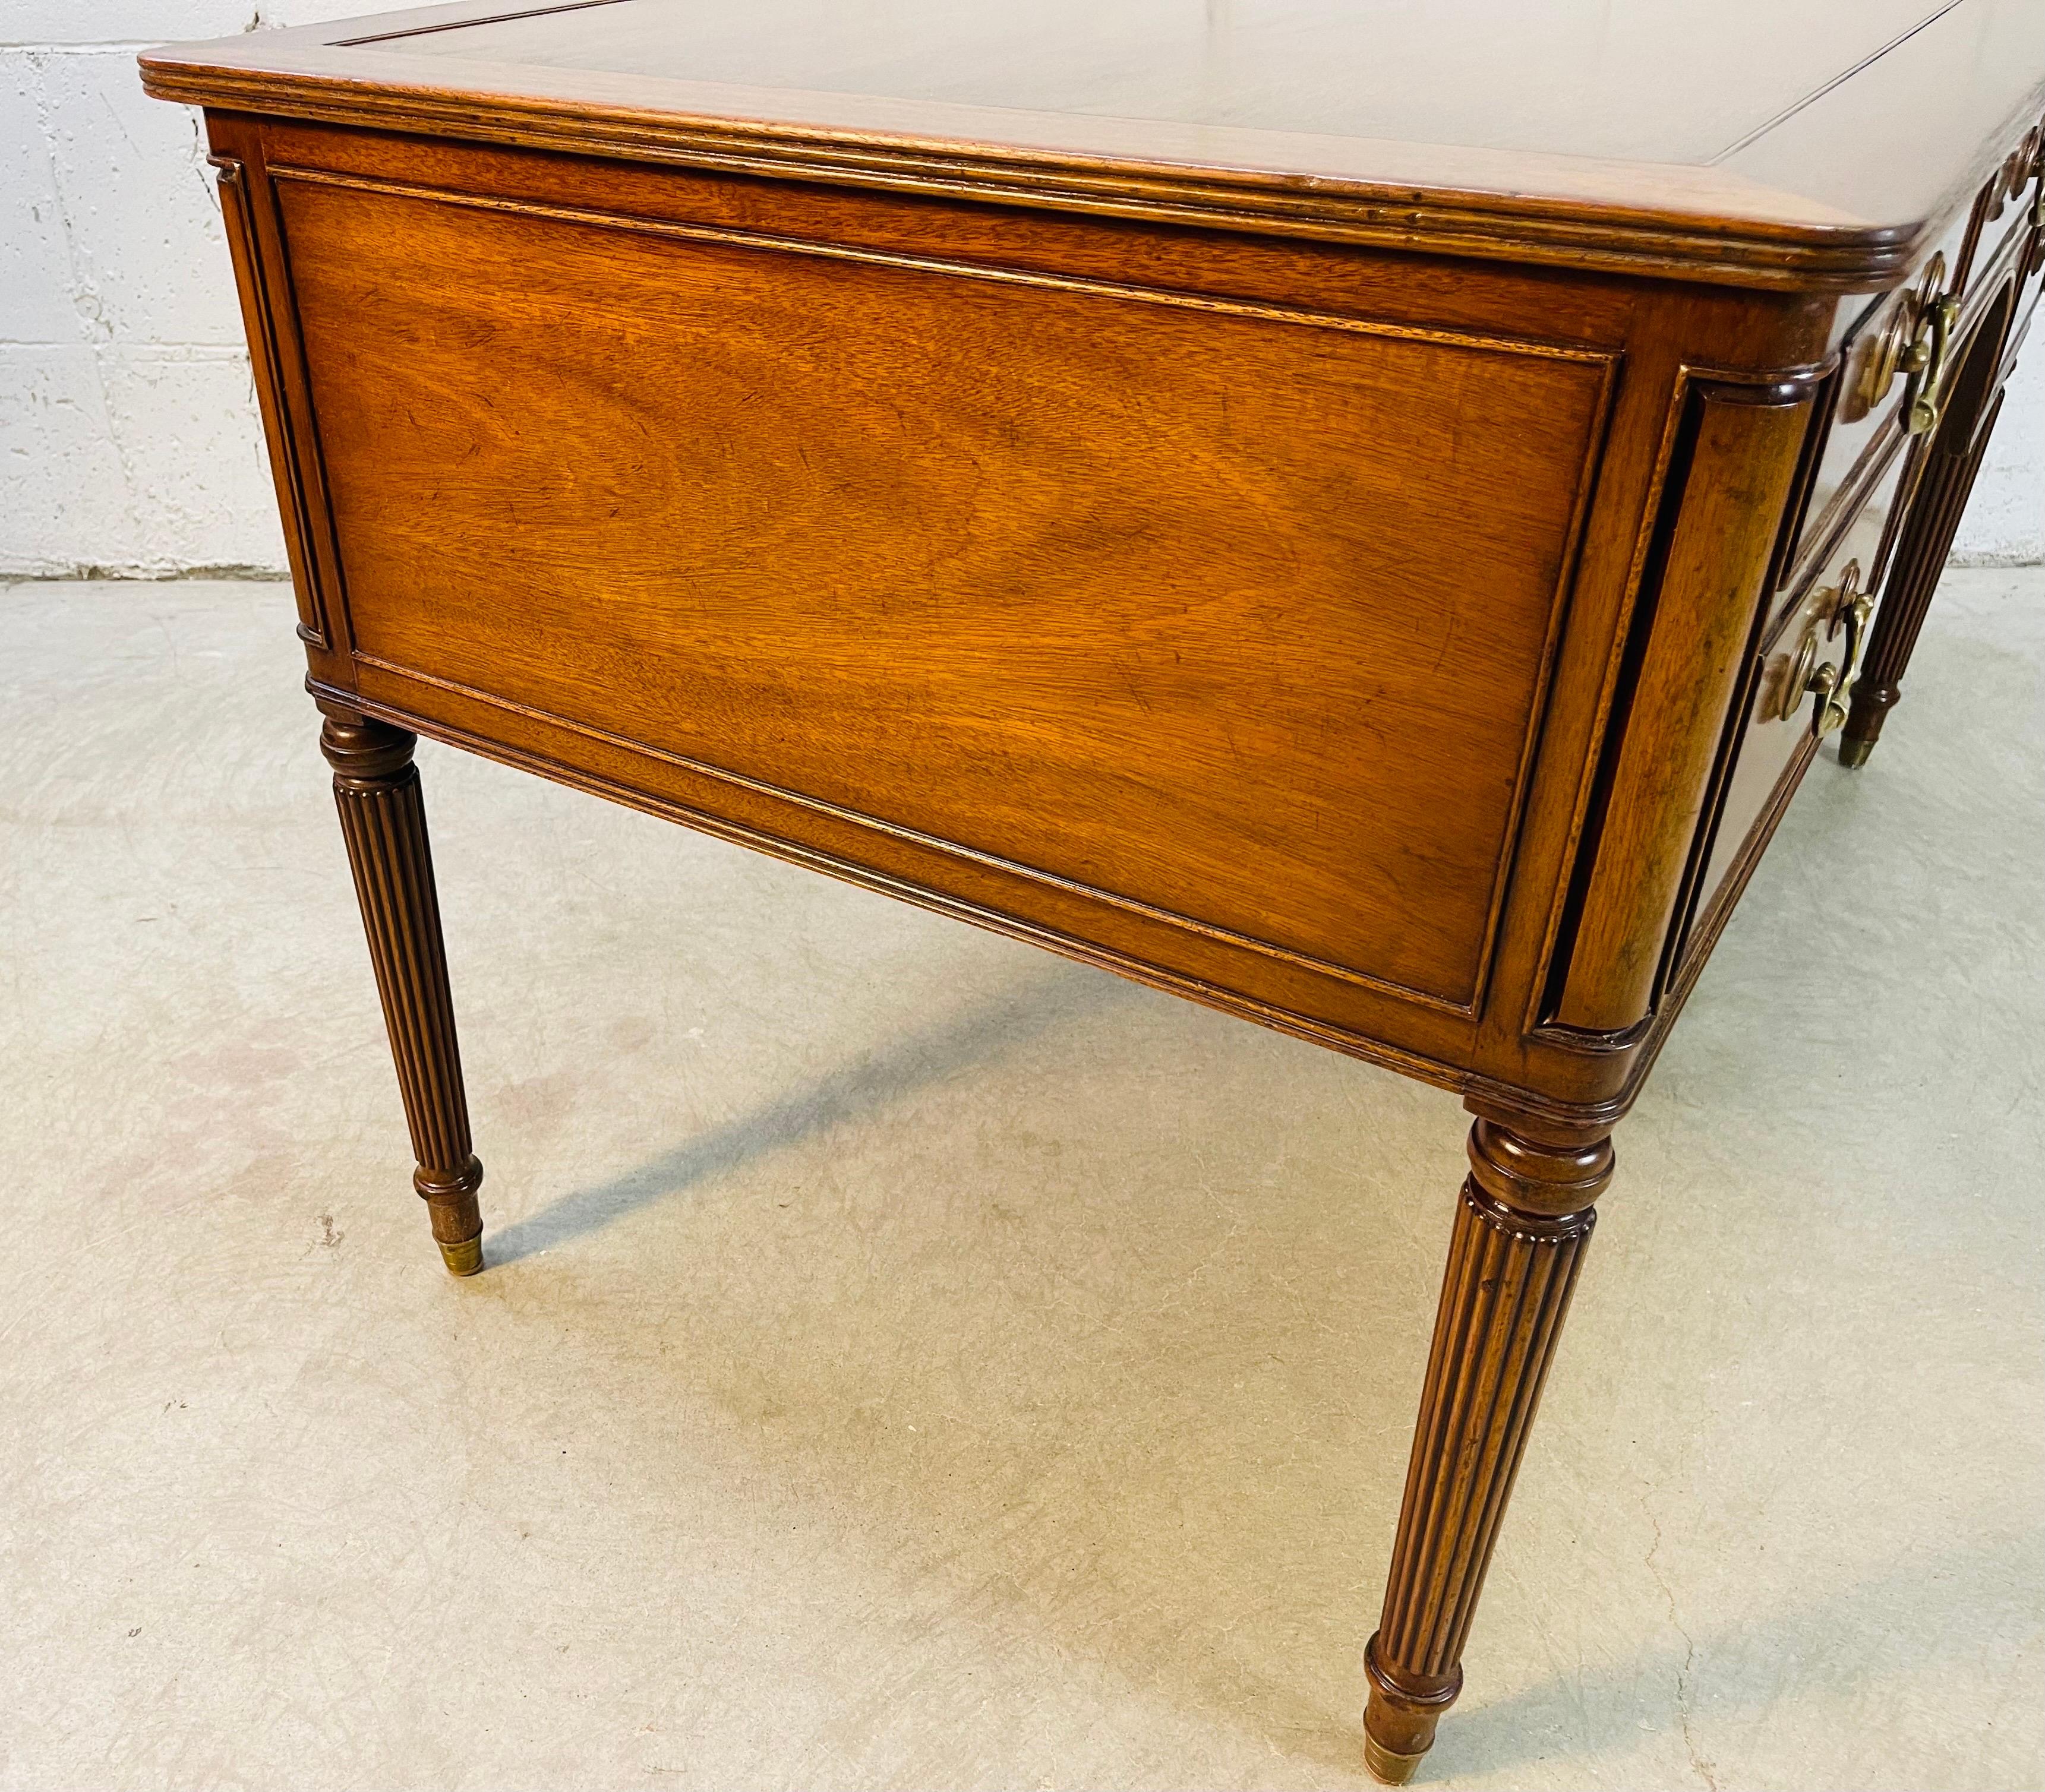 English Neoclassical Sheraton Style Mahogany Desk by Kittinger For Sale 5